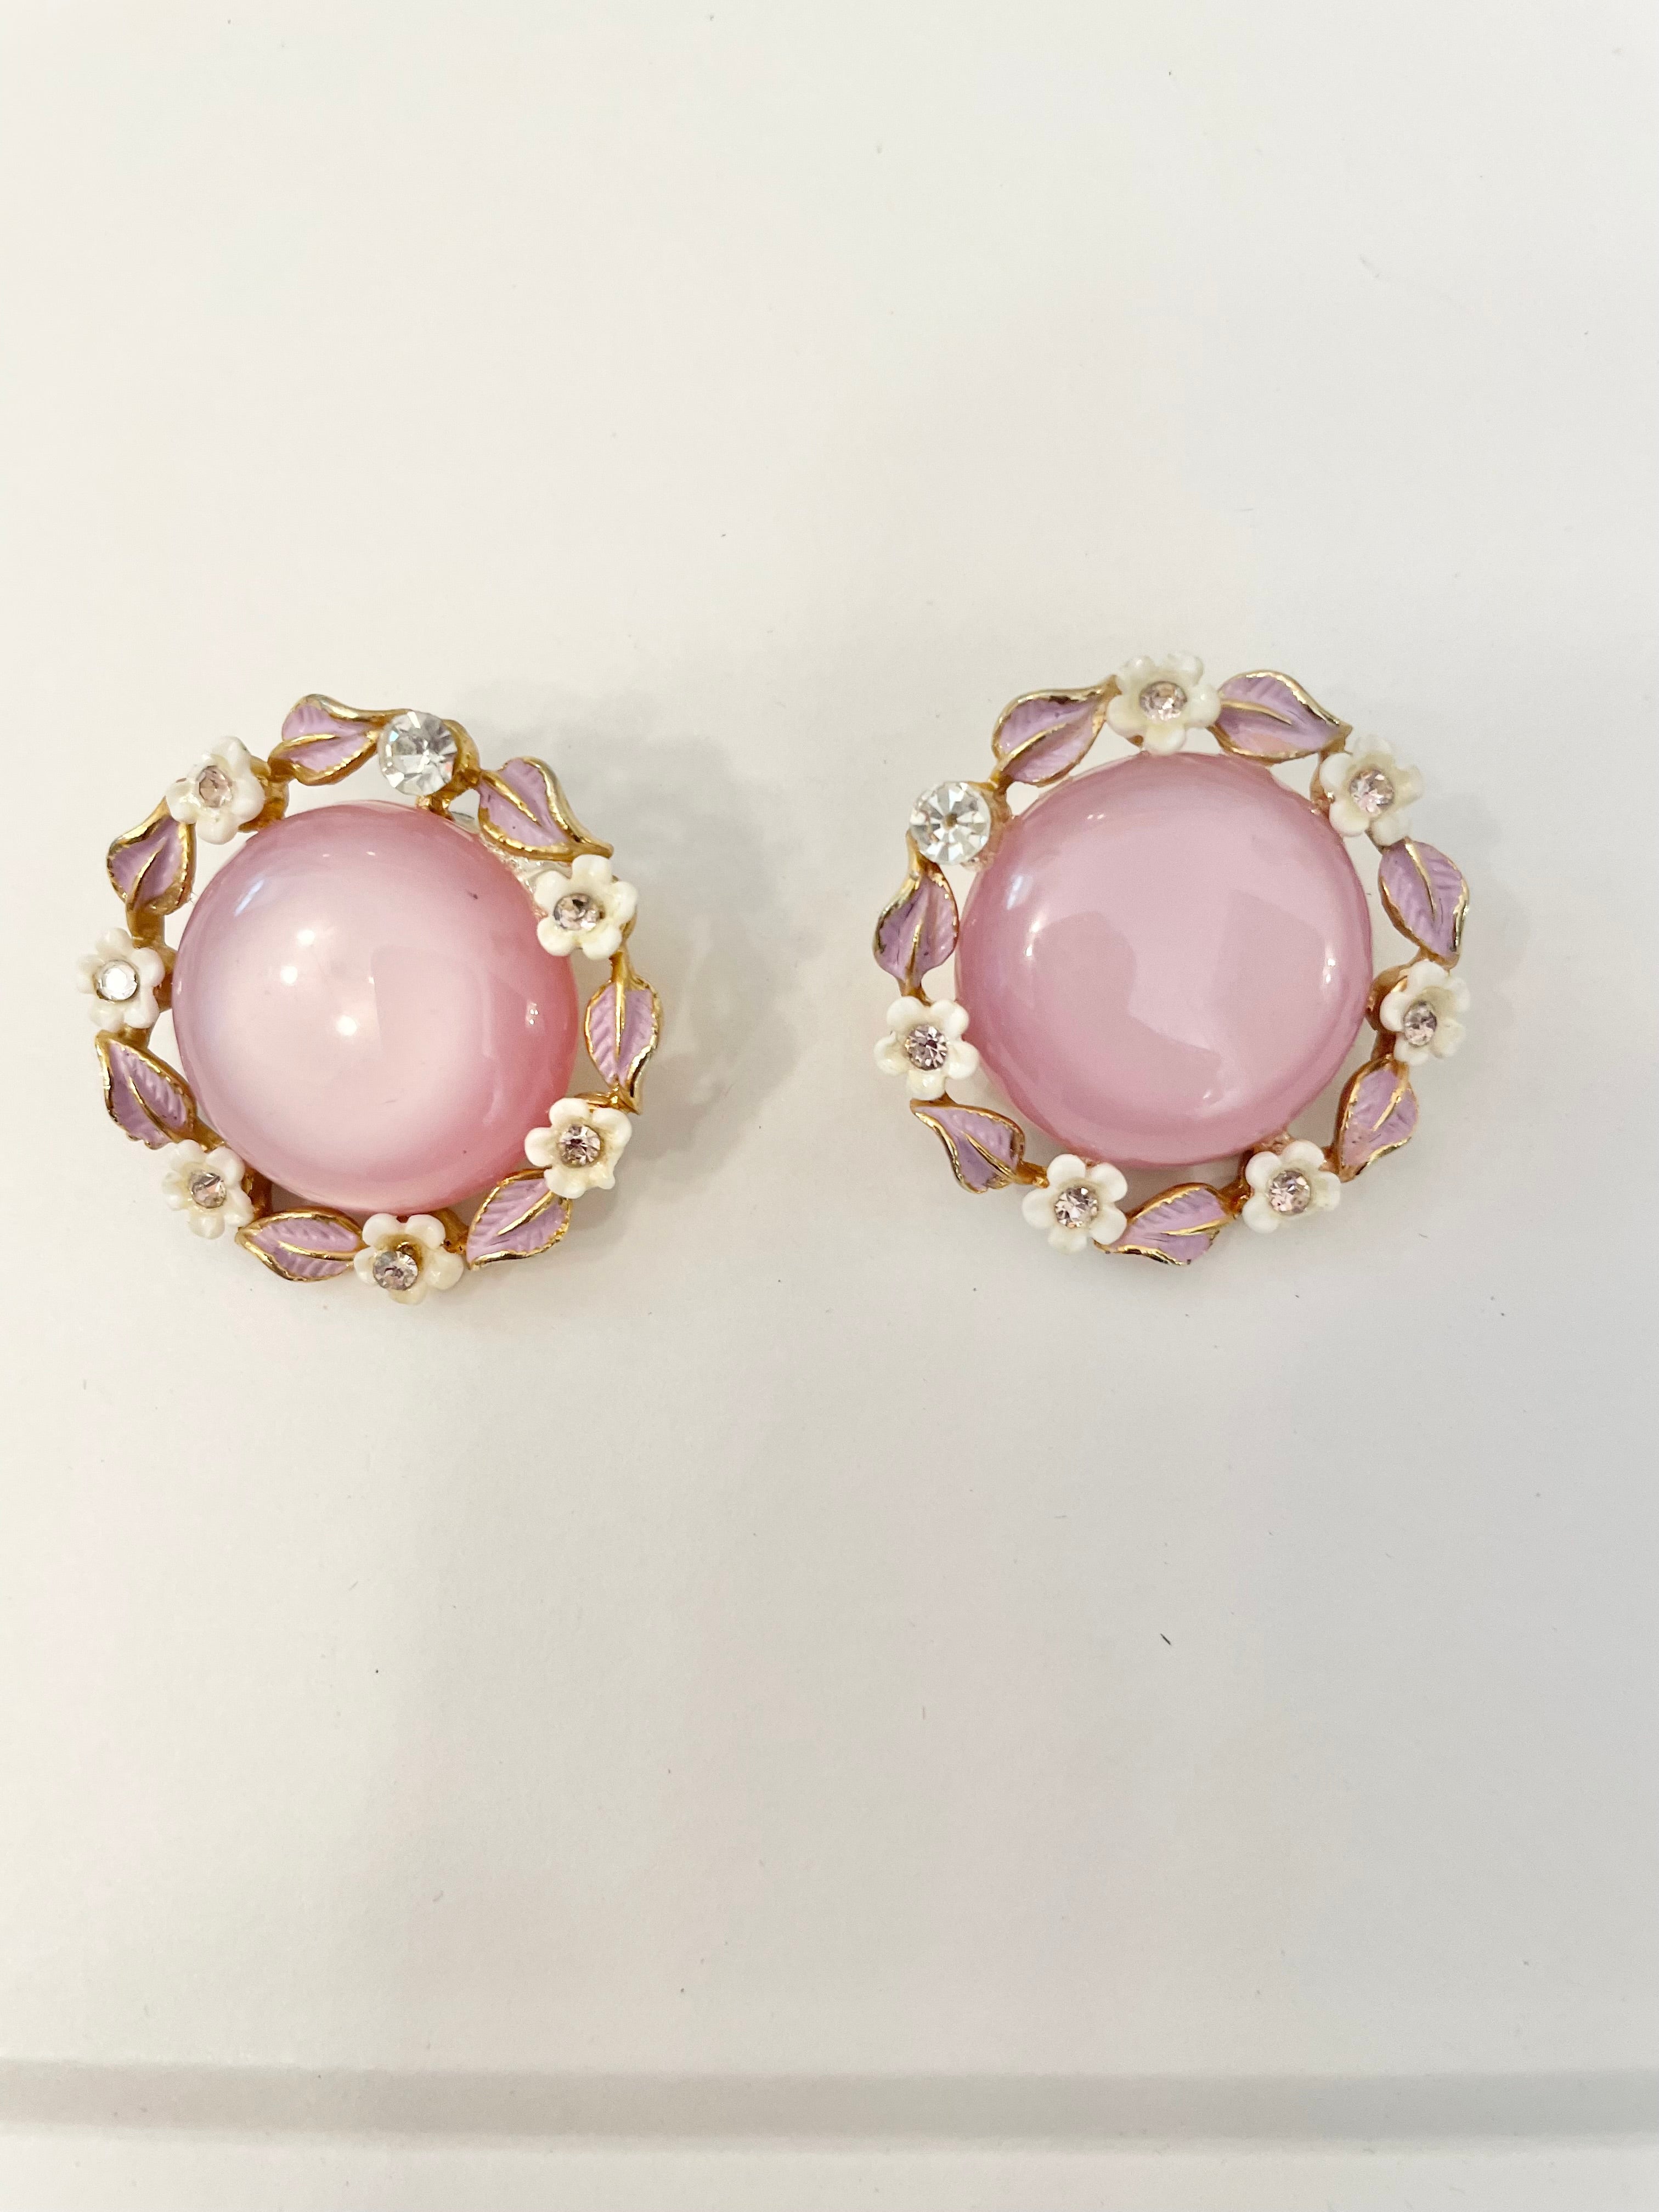 The Flirty Gal and her love of pink. These are so beautiful, soft moon glow flower earrings are truly delightful.